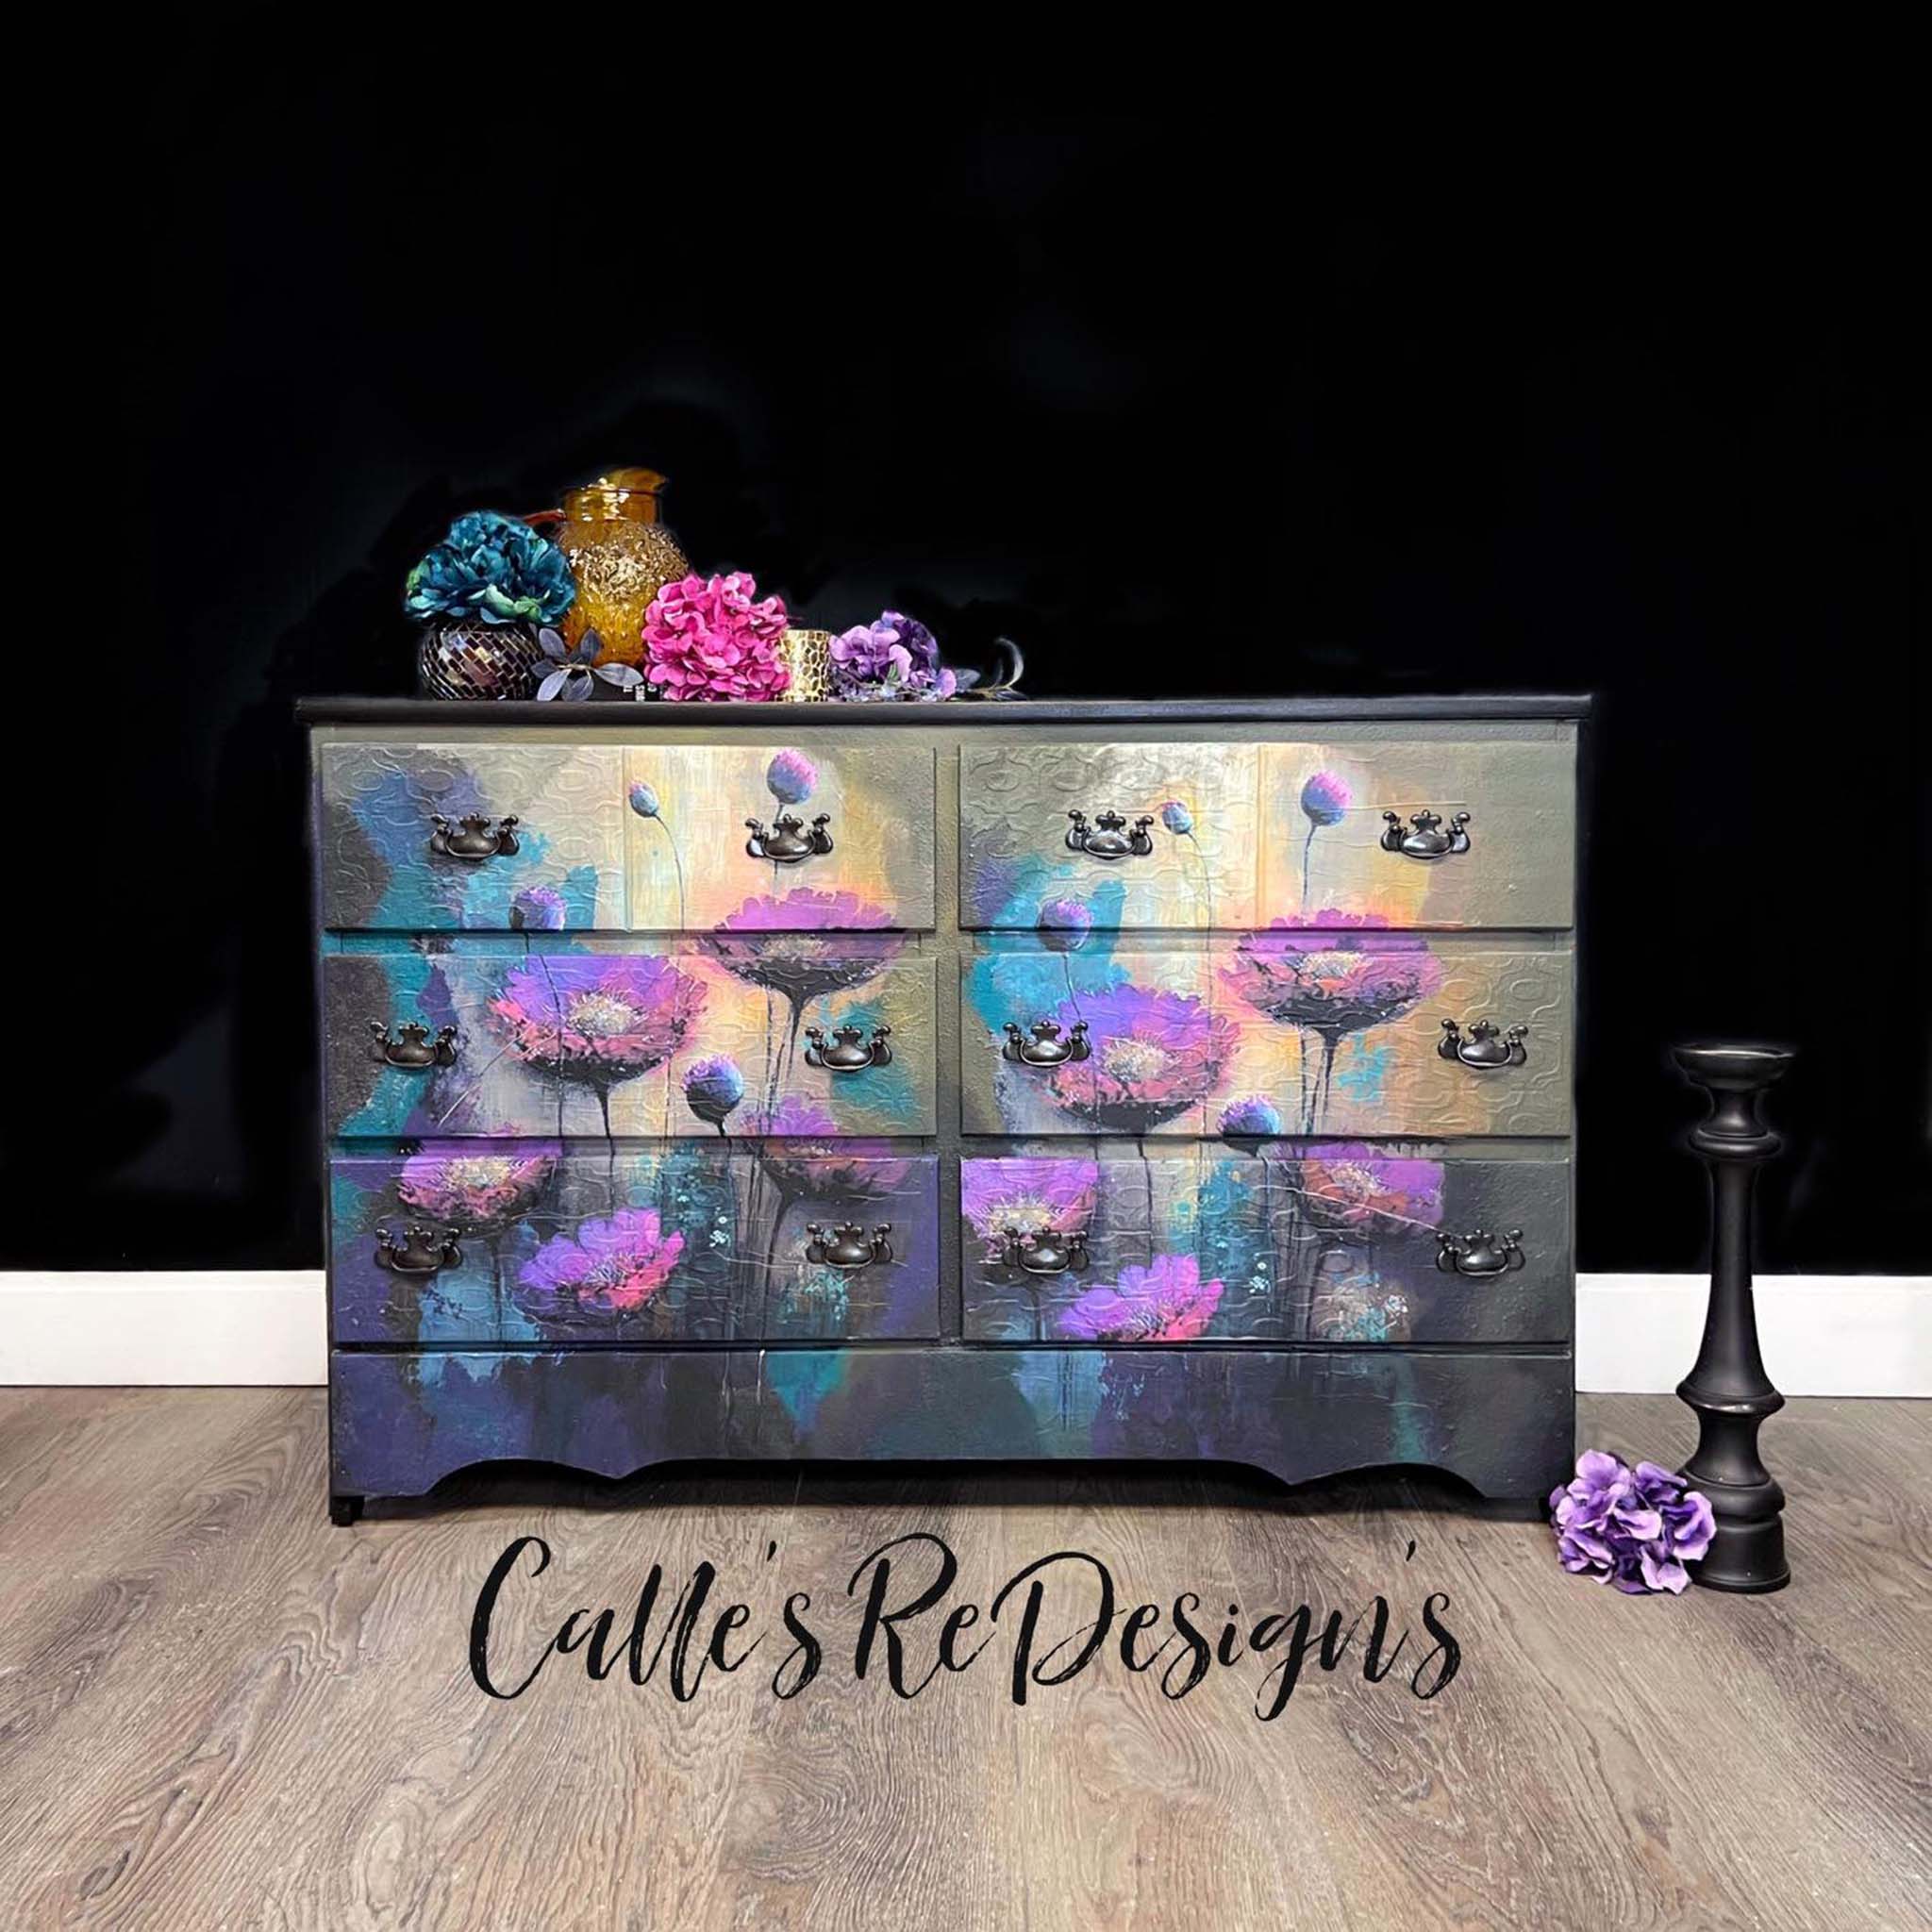 A 6-drawer dresser refurbished by Calle's ReDesign's is painted dark grey and features Whimsykek's Purple Poppies tissue paper on its drawers.